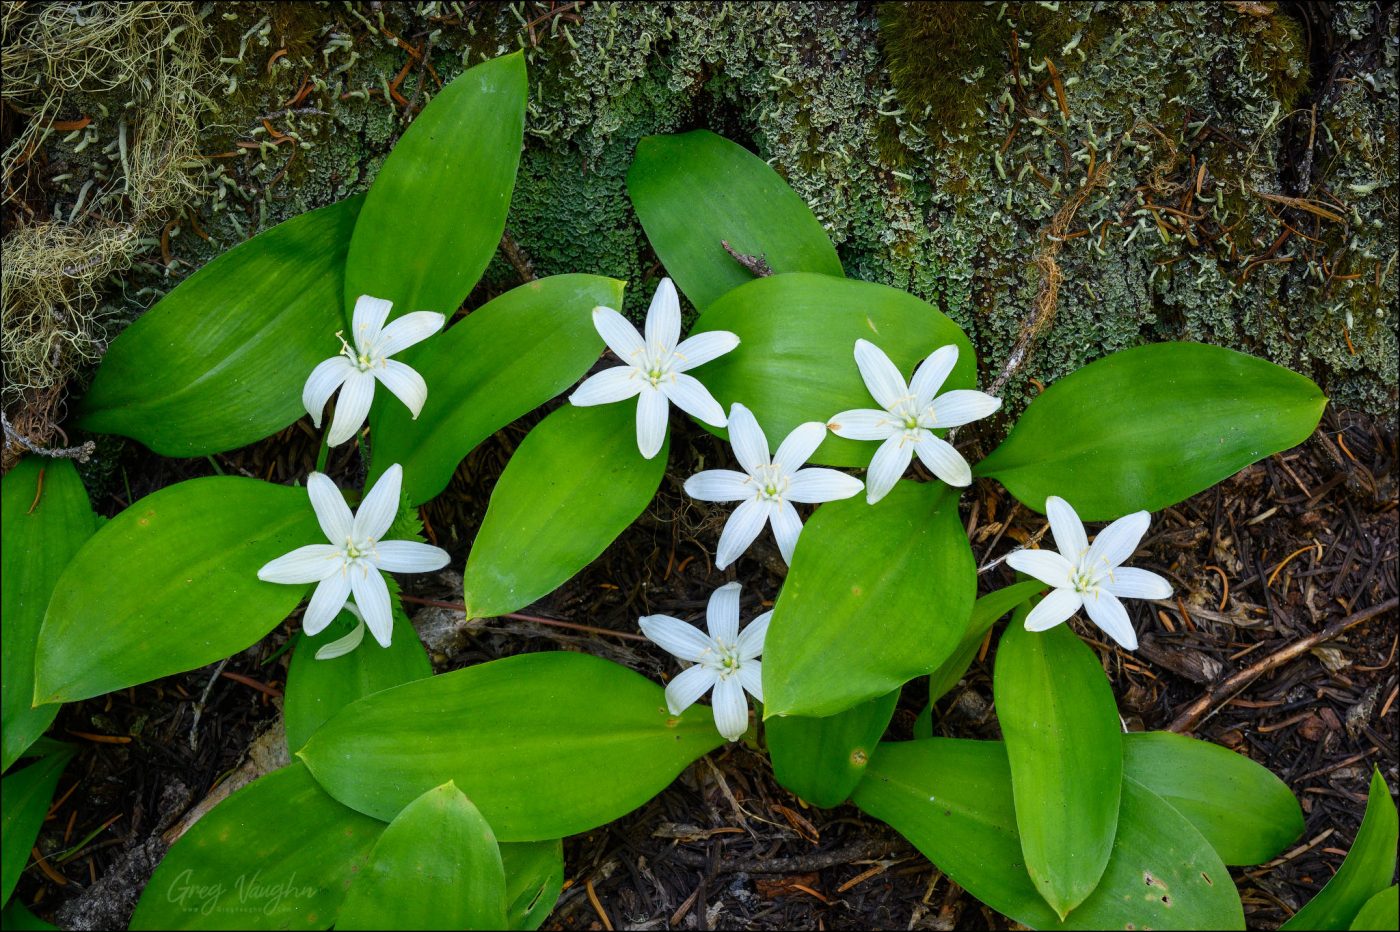 photograph of Bead Lily flowers and leaves